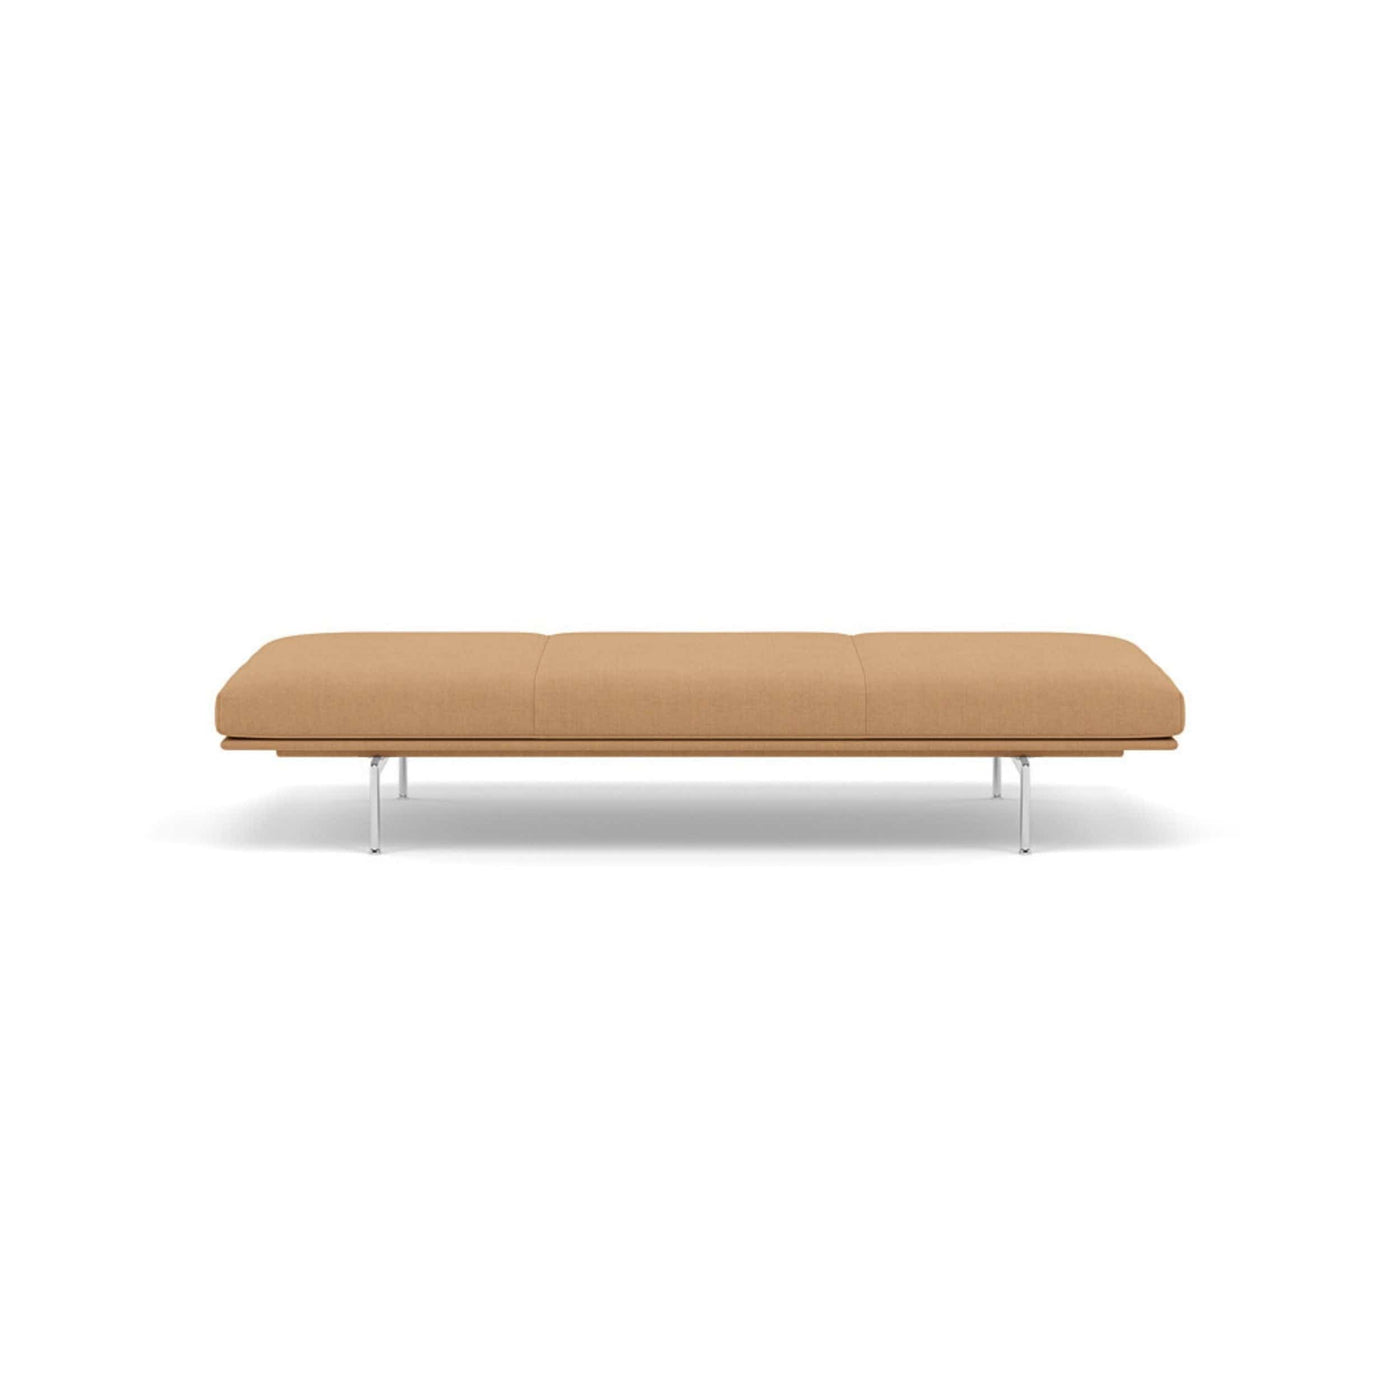 muuto outline daybed in fiord 451 fabric and polished aluminium legs. Made to order from someday designs. #colour_fiord-451